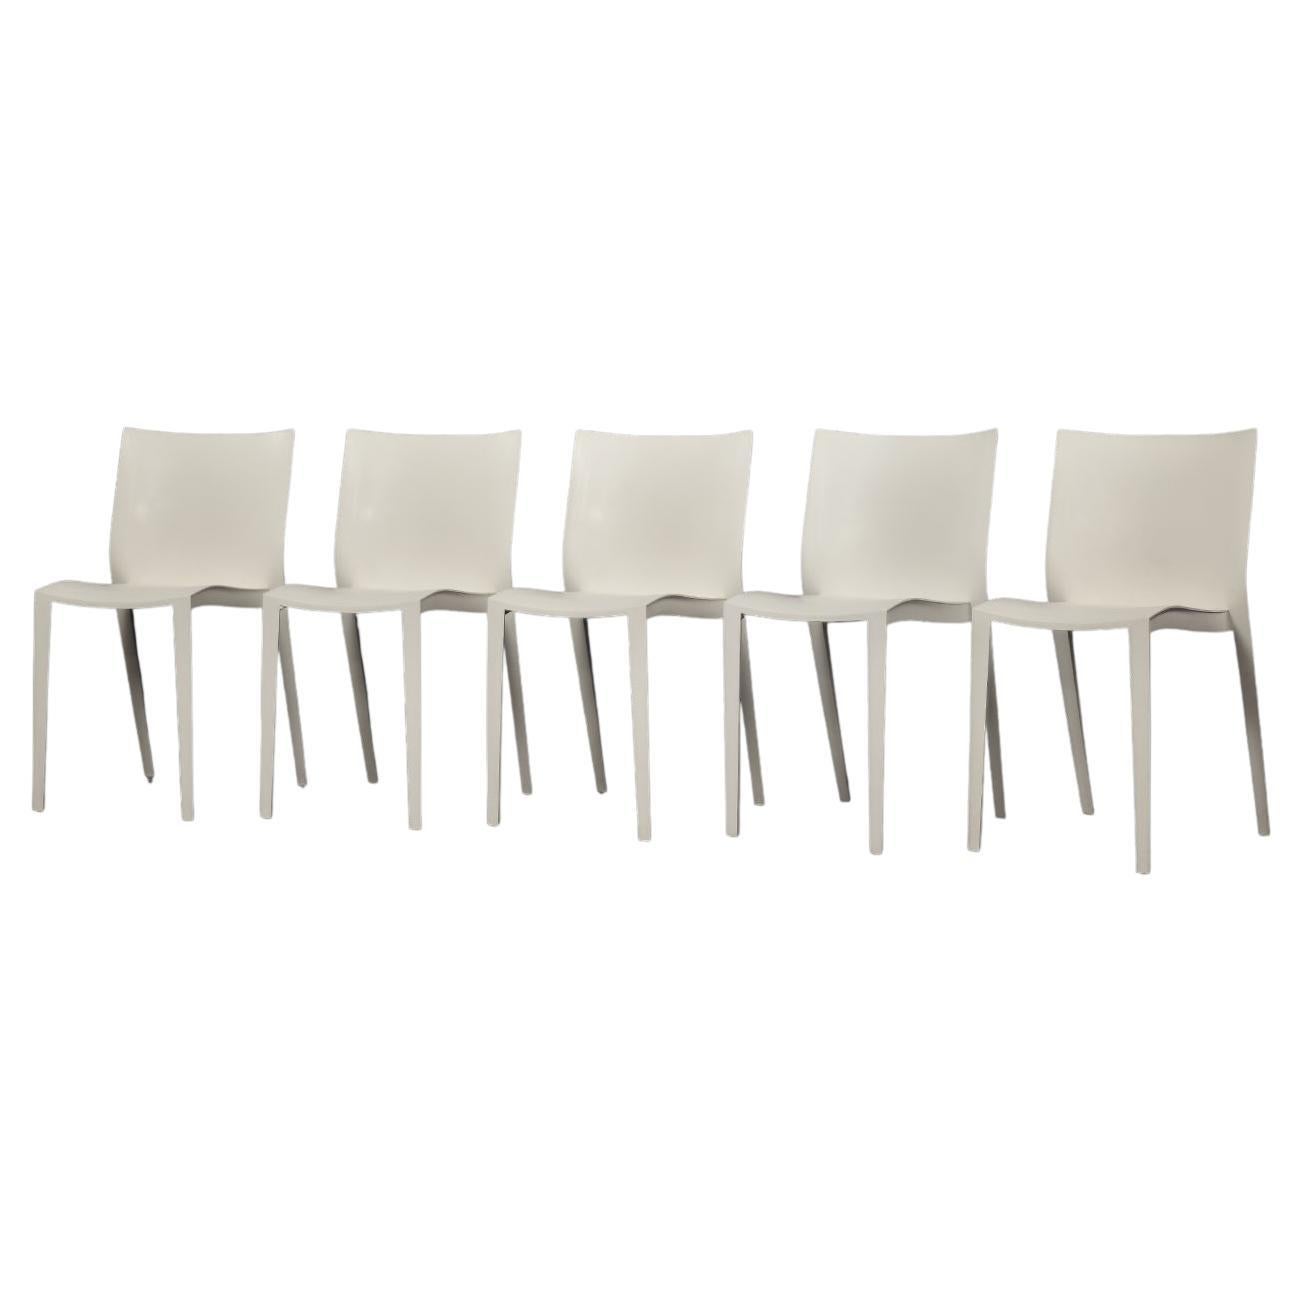 Set of 5 Vintage Midcentury French Modern Slickslick Chairs by Philippe Starck For Sale